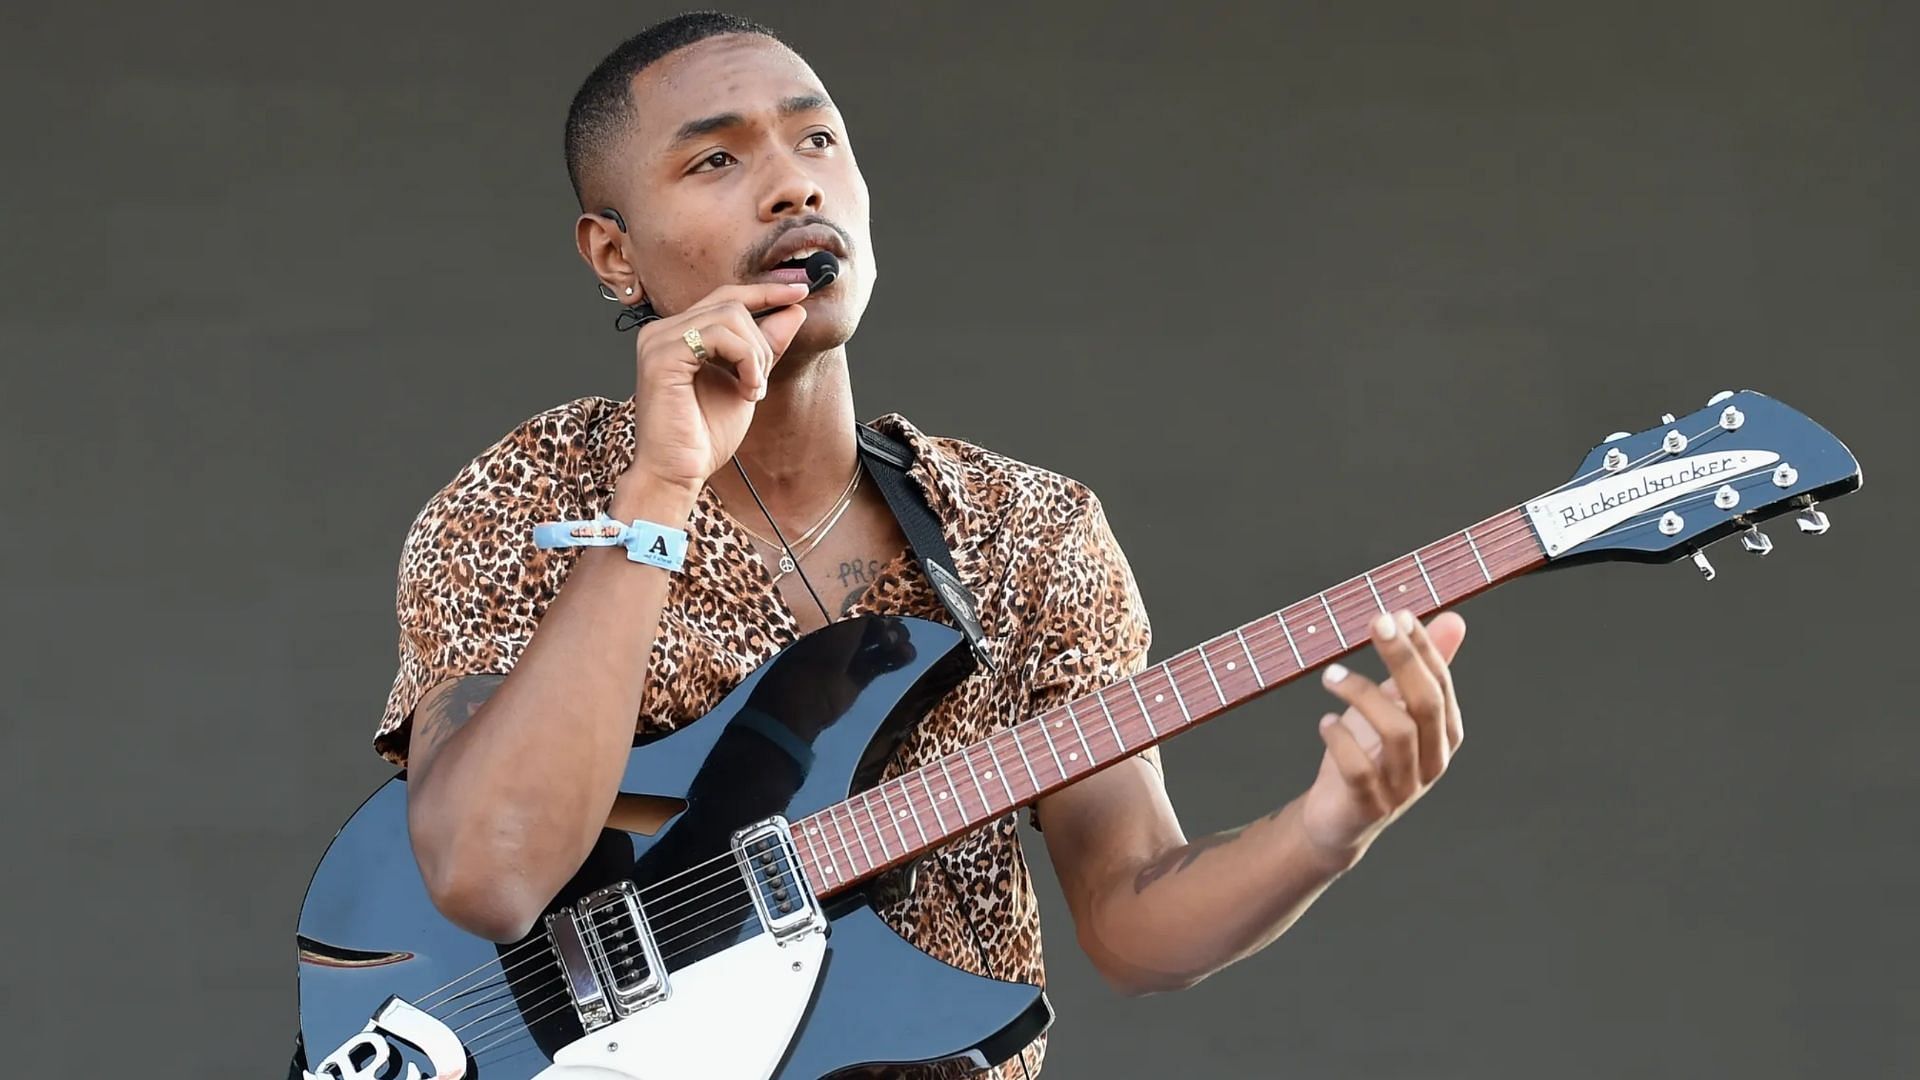 Steve Lacy tour Tickets, where to buy, dates and more